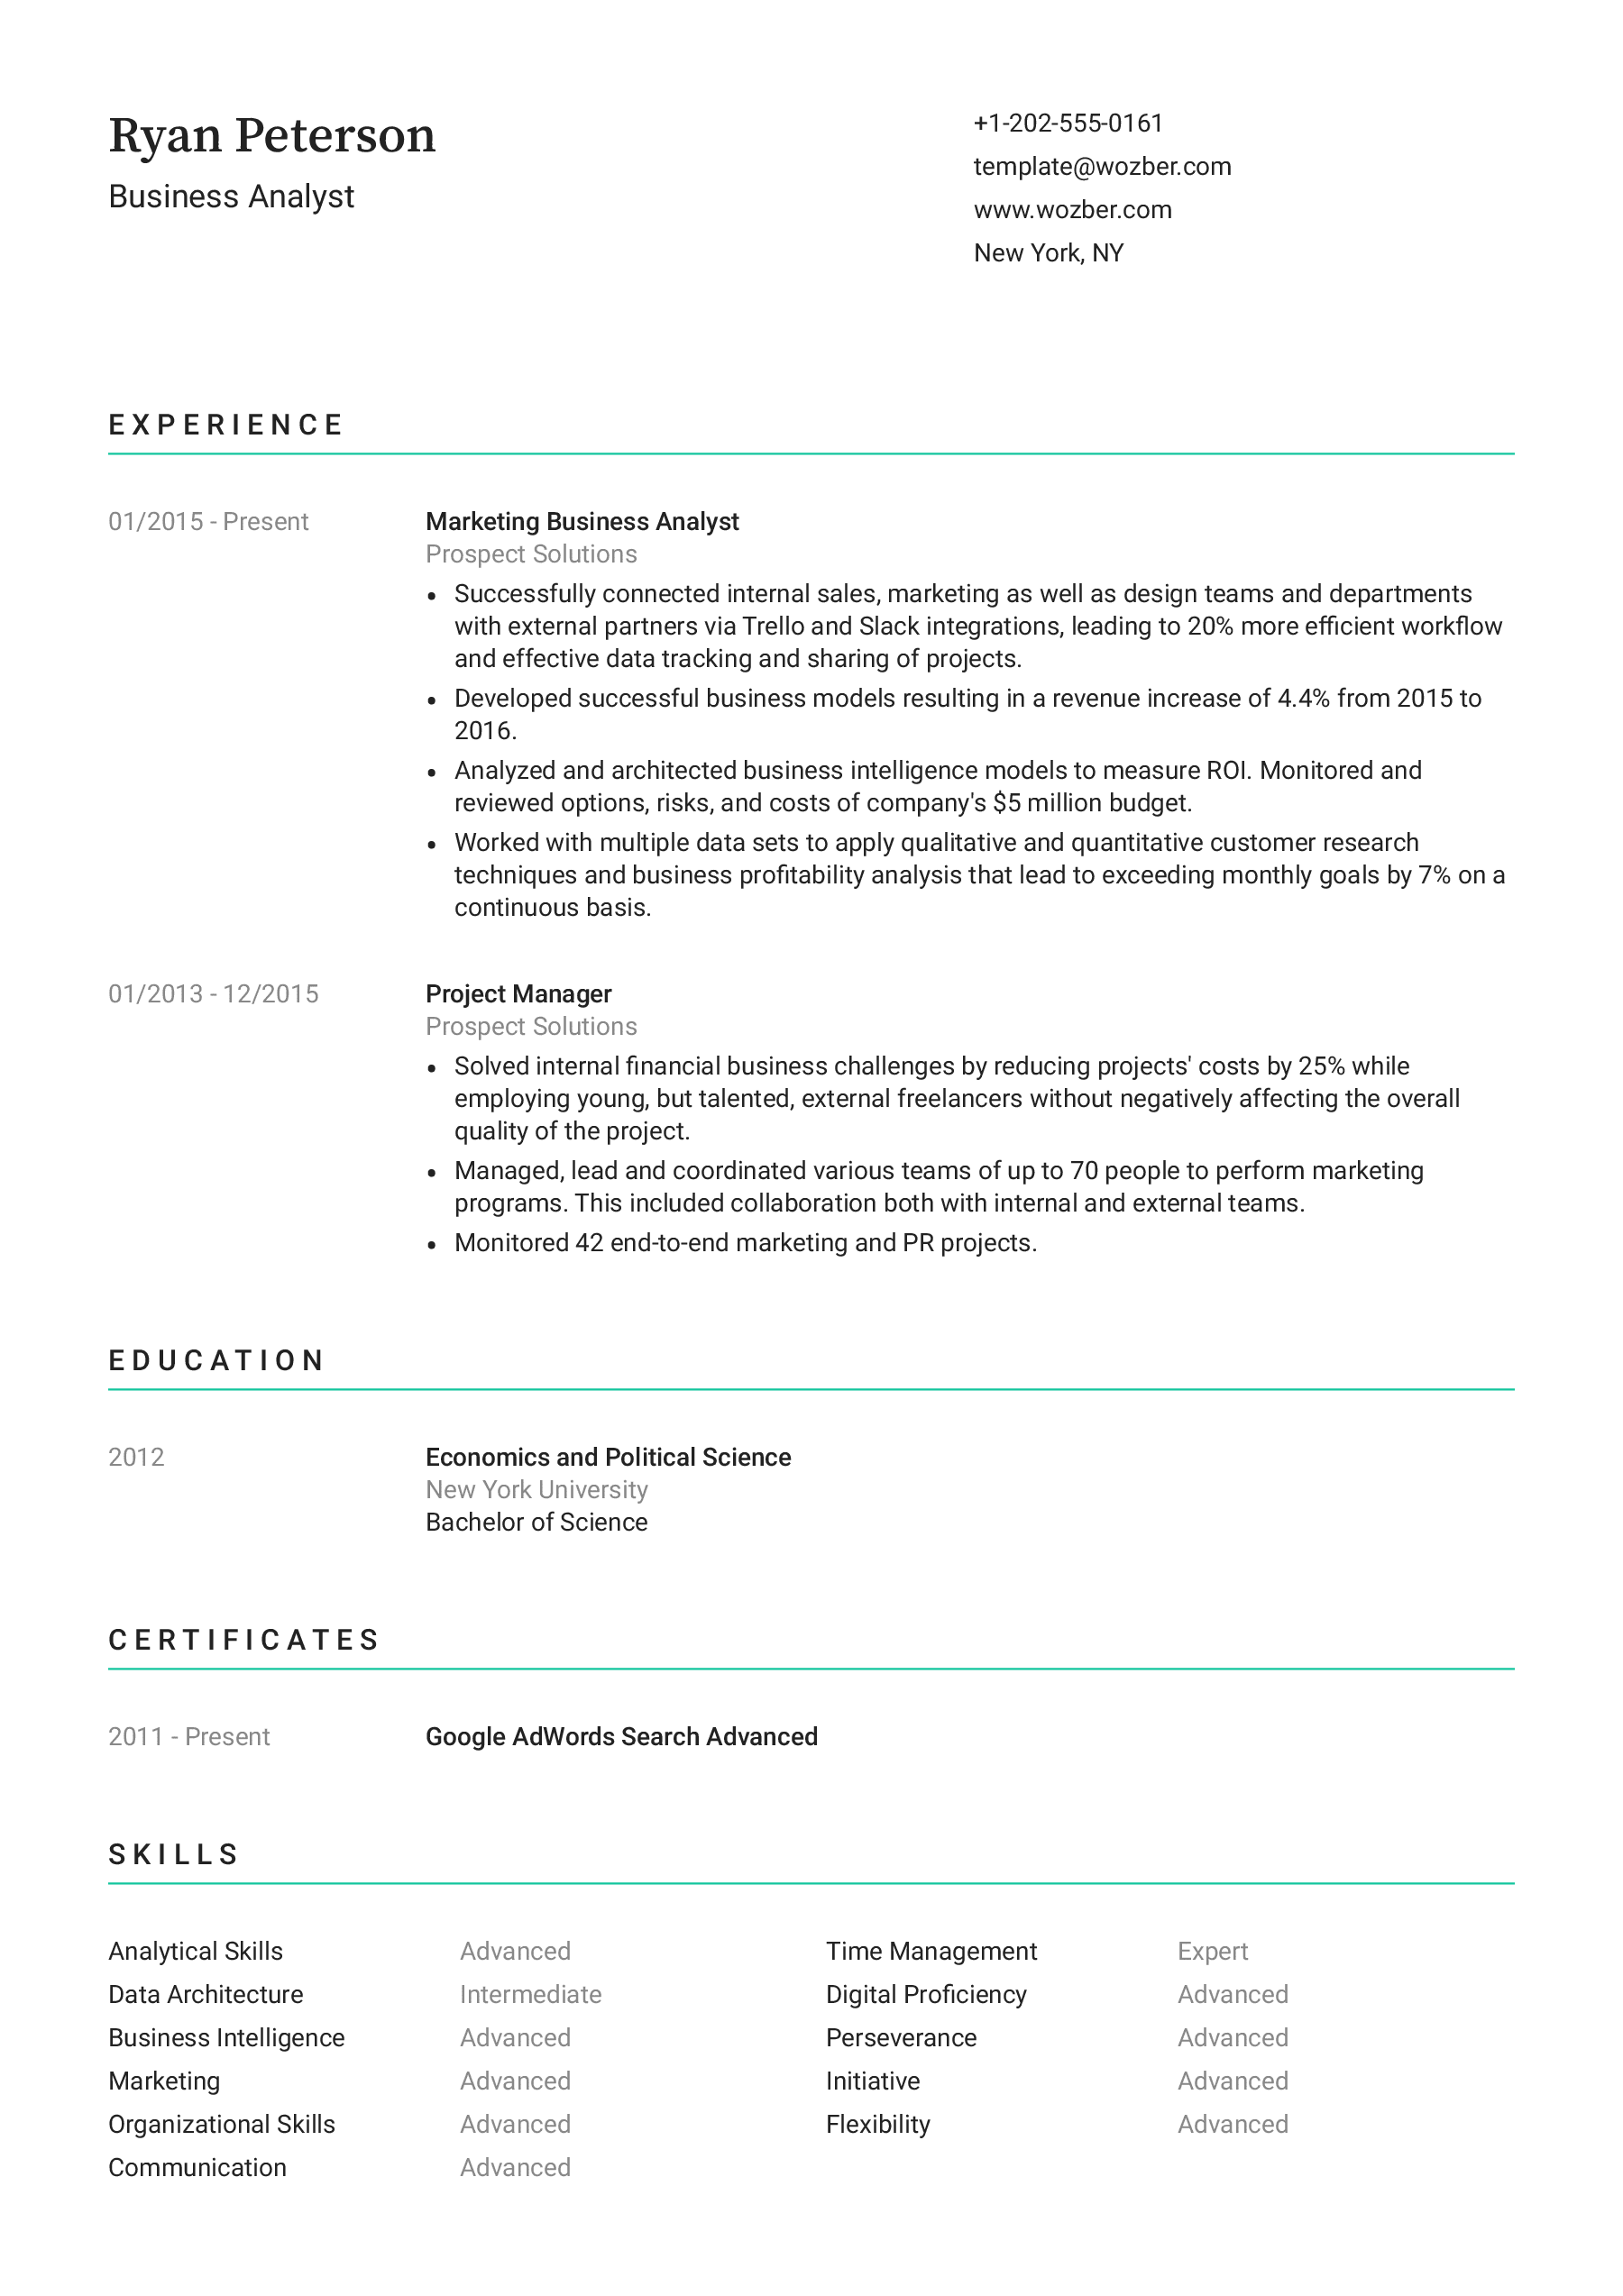 A minimalistic CV template optimised for applicant tracking systems and suitable for any professional.